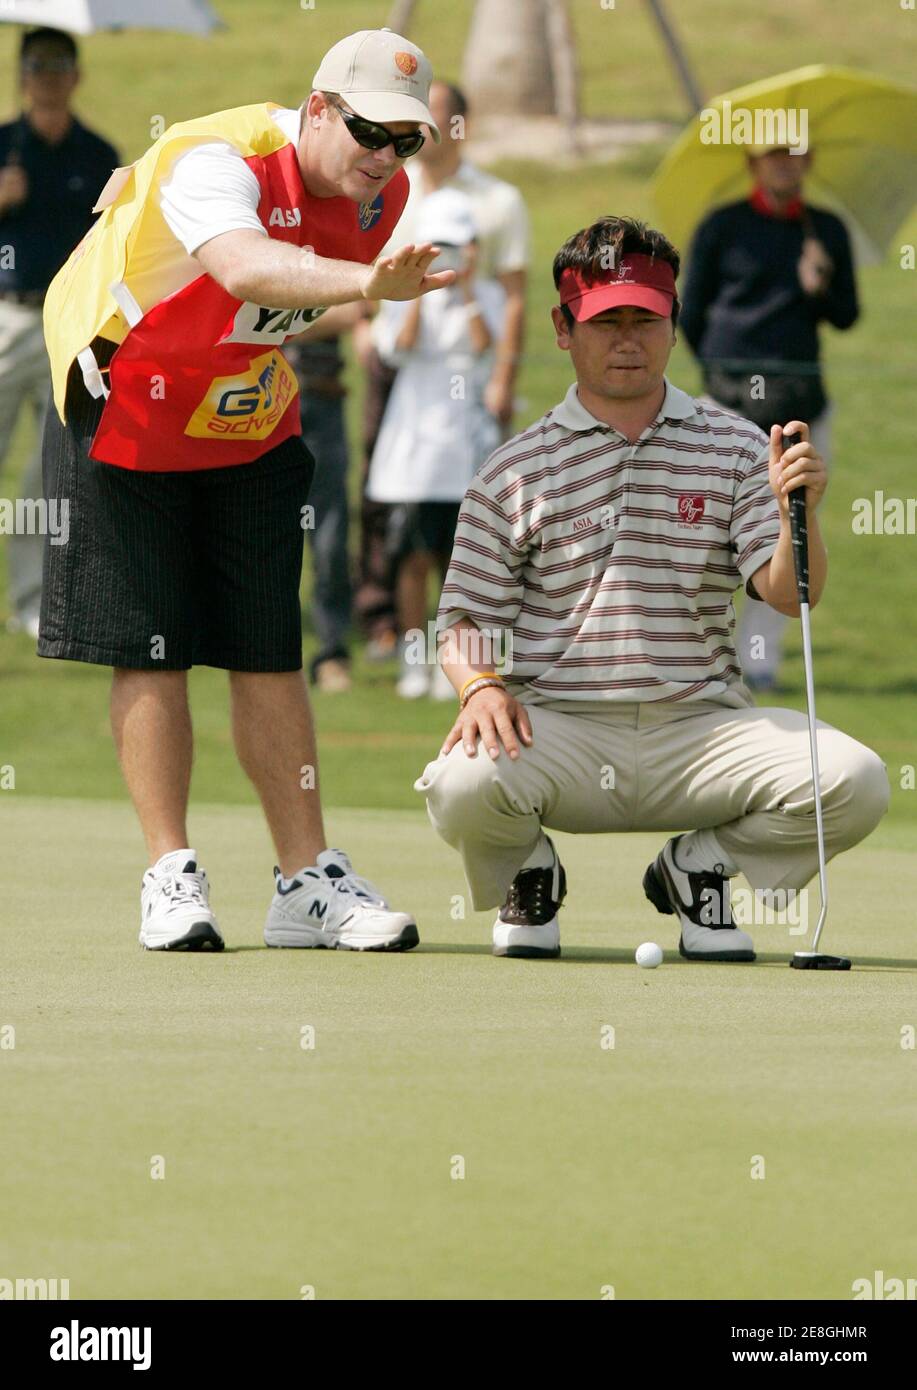 YE Yang (R) of South Korea lines up a putt on the 2nd hole during the four-ball match of the Royal Trophy Europe vs Asia Golf Championship at Amata Spring Country Club on the outskirts of Bangkok January 13, 2007. REUTERS/Chaiwat Subprasom (THAILAND) Stock Photo